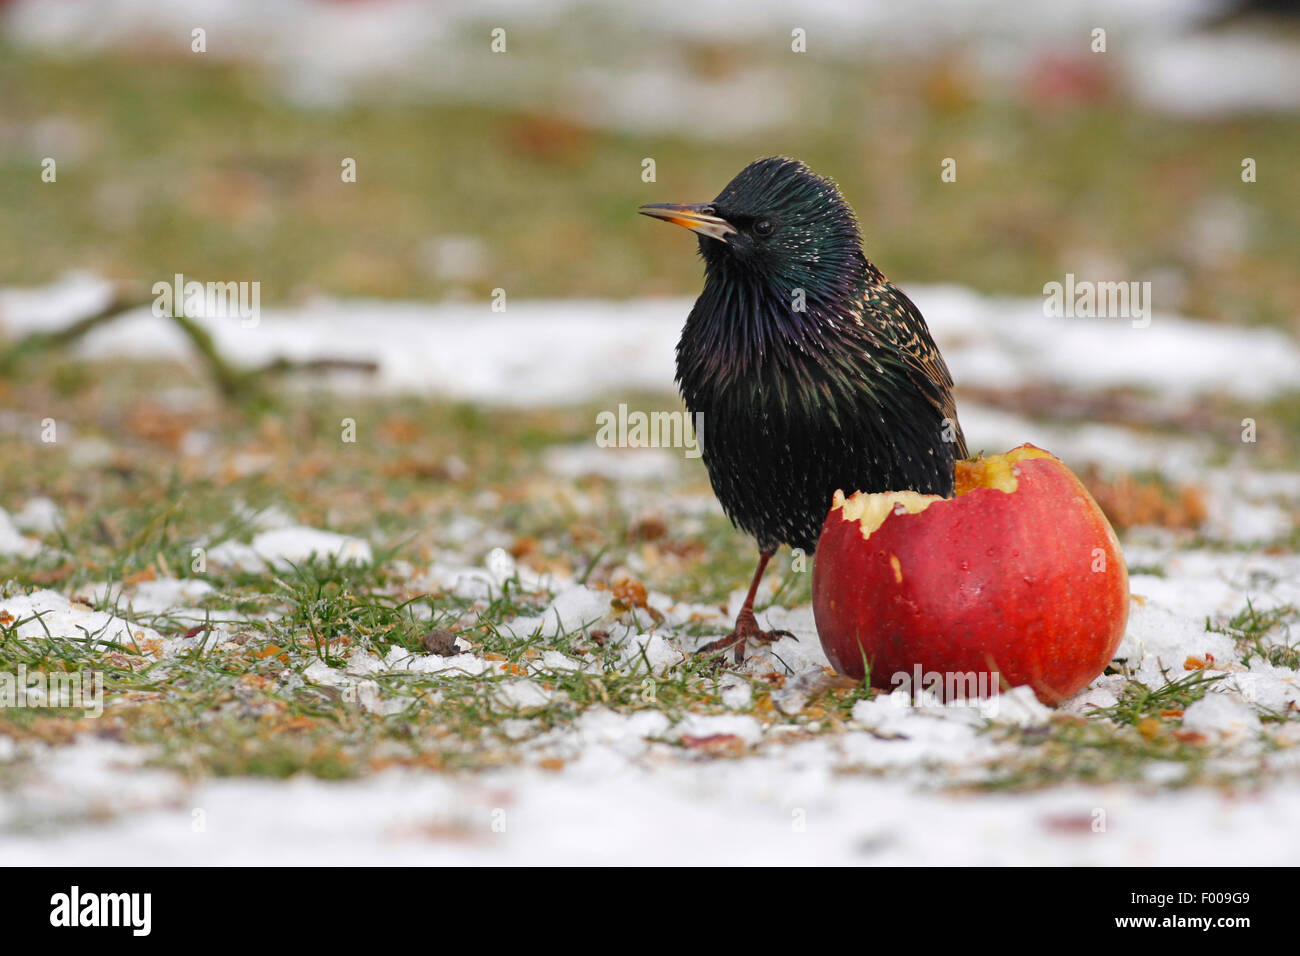 common starling (Sturnus vulgaris), eating apple putted down during winter, Germany Stock Photo